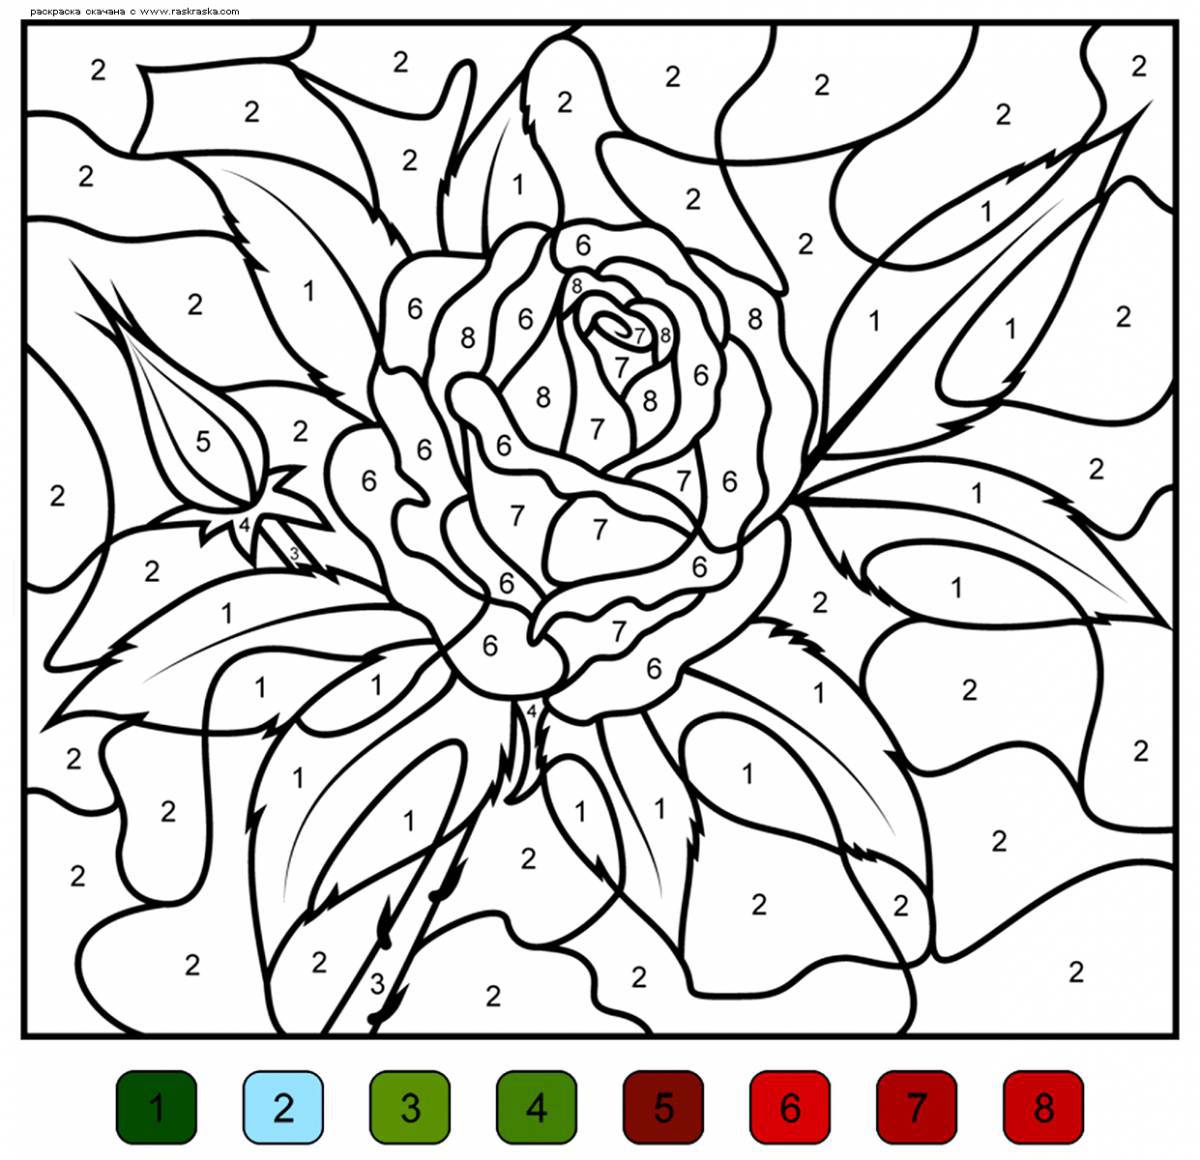 Fascinating adult coloring by numbers